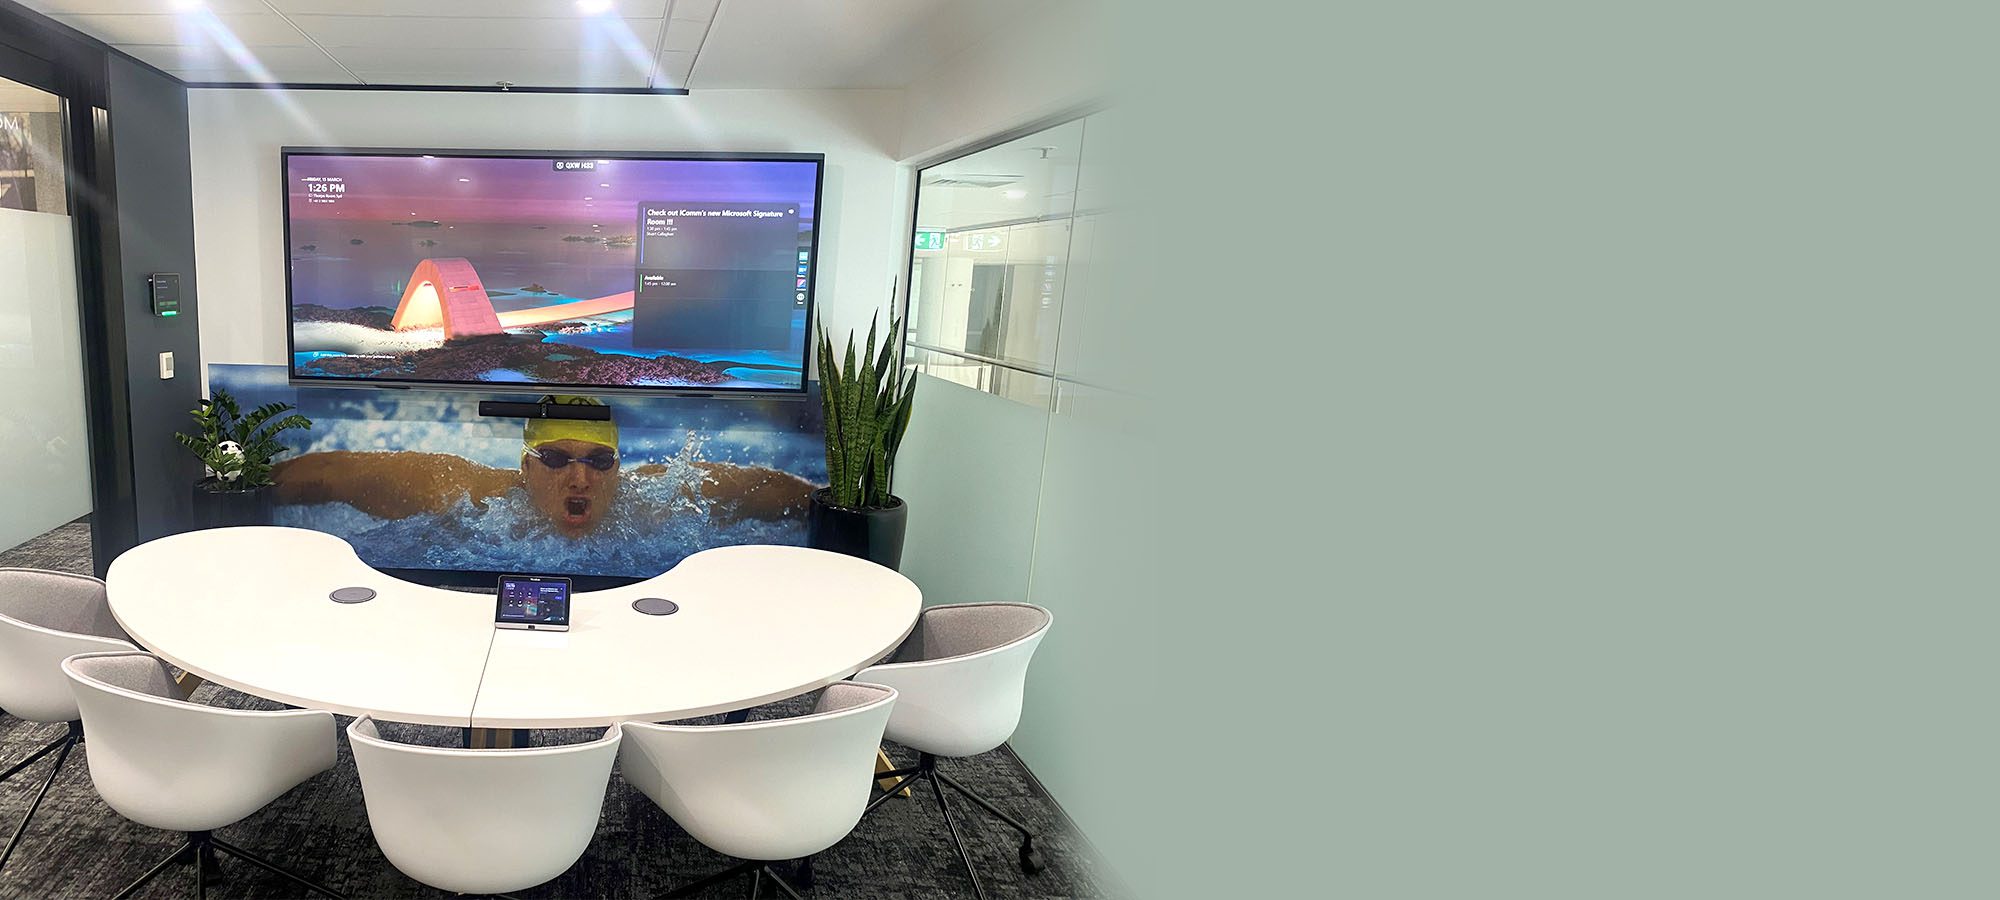 Photo of Microsoft Signature Room with curved table, modern looking chairs and large screen